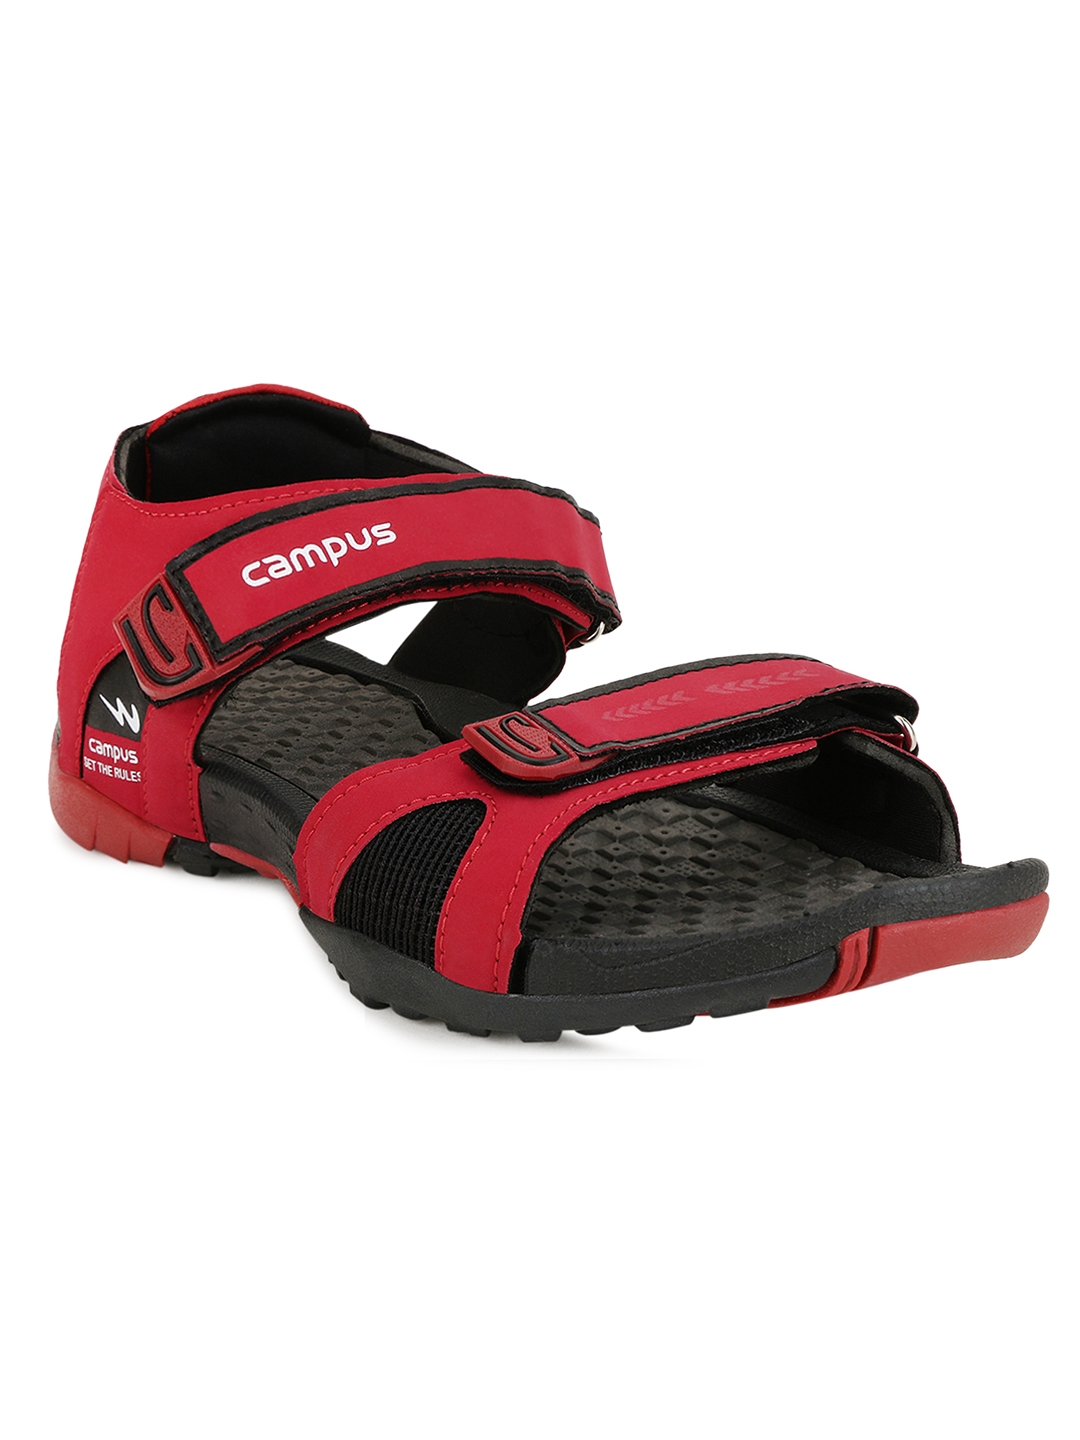 Campus Shoes | Red Sandals